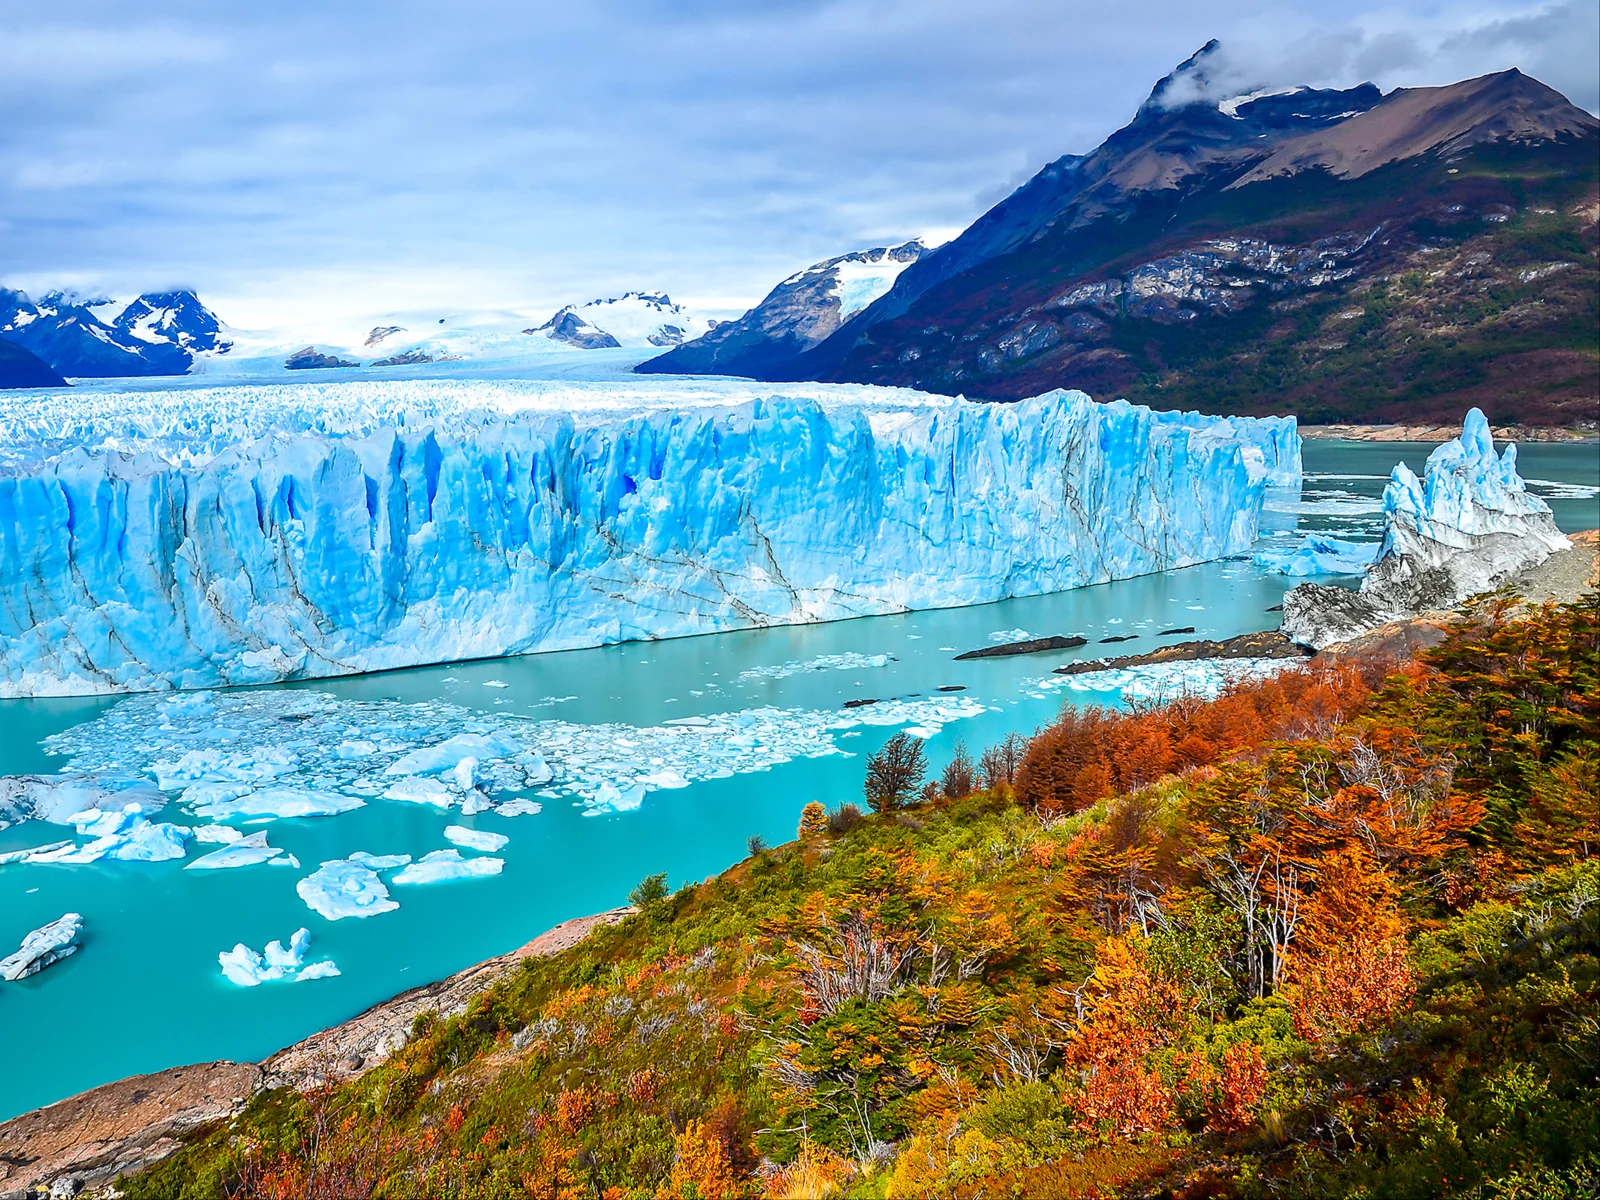 Perito Moreno glacier as seen during the worst time to visit Argentina, the Winter